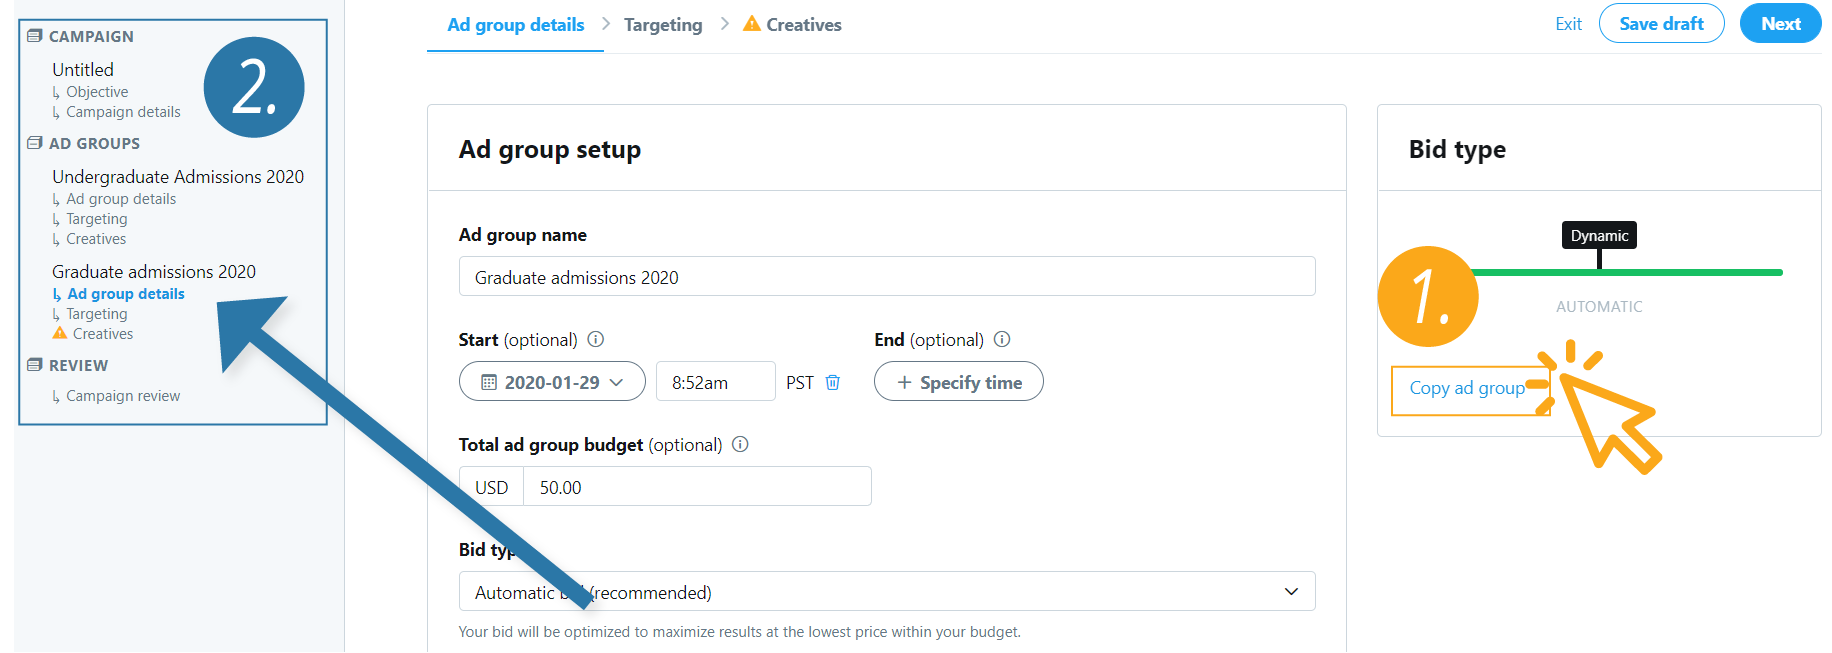 image showing how to add twitter ad details